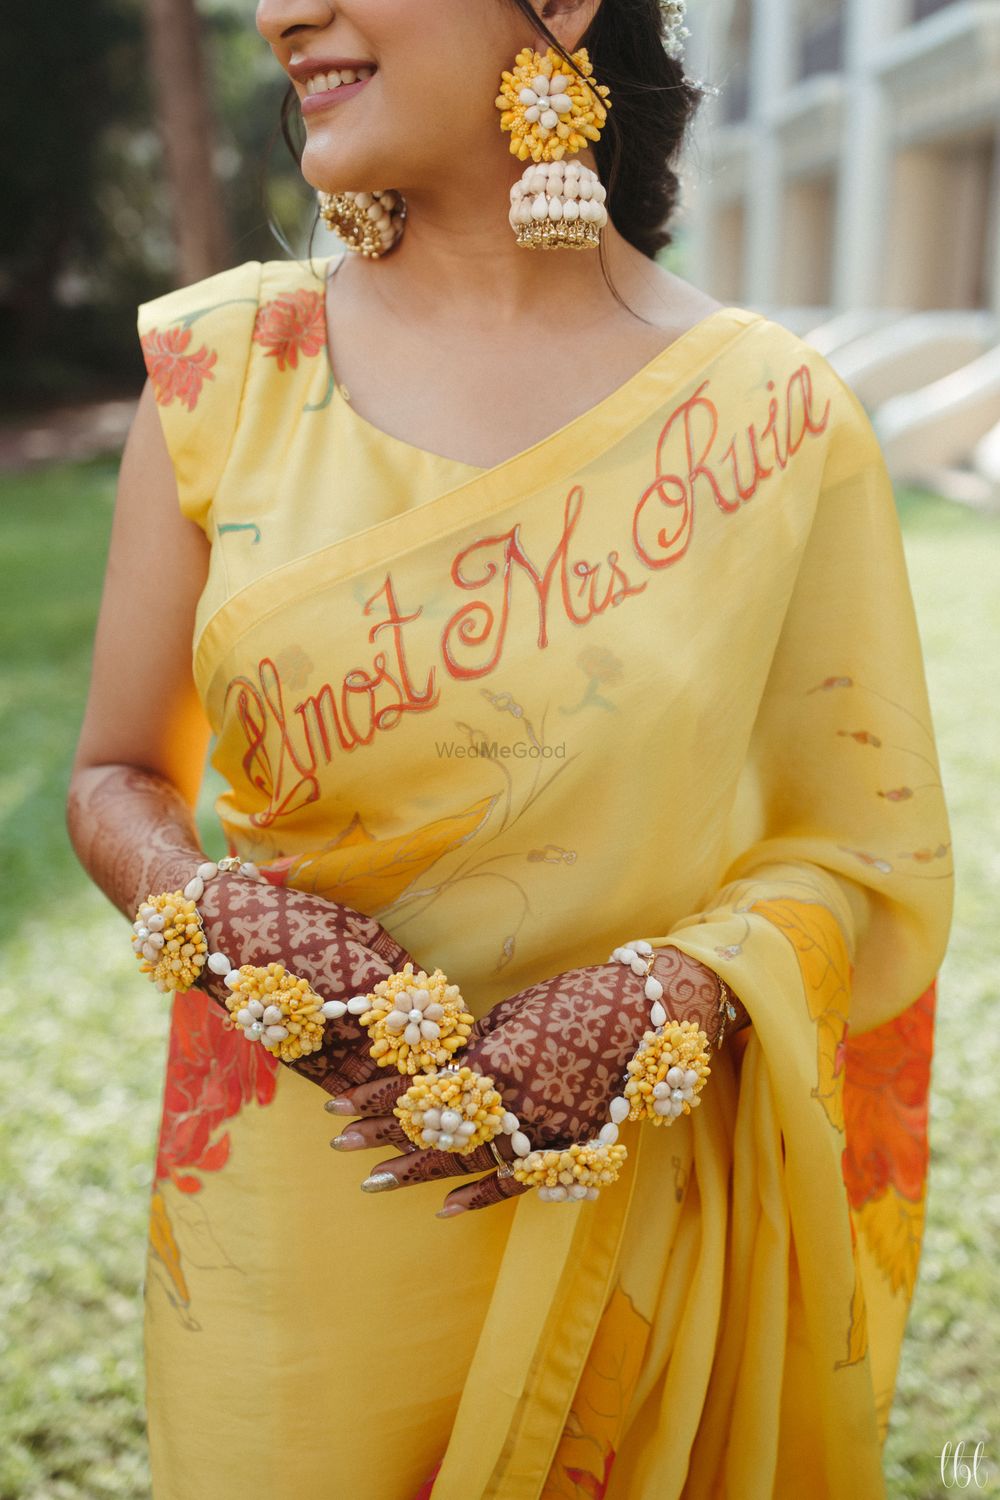 Photo of personalised yellow saree for haldi by the bride